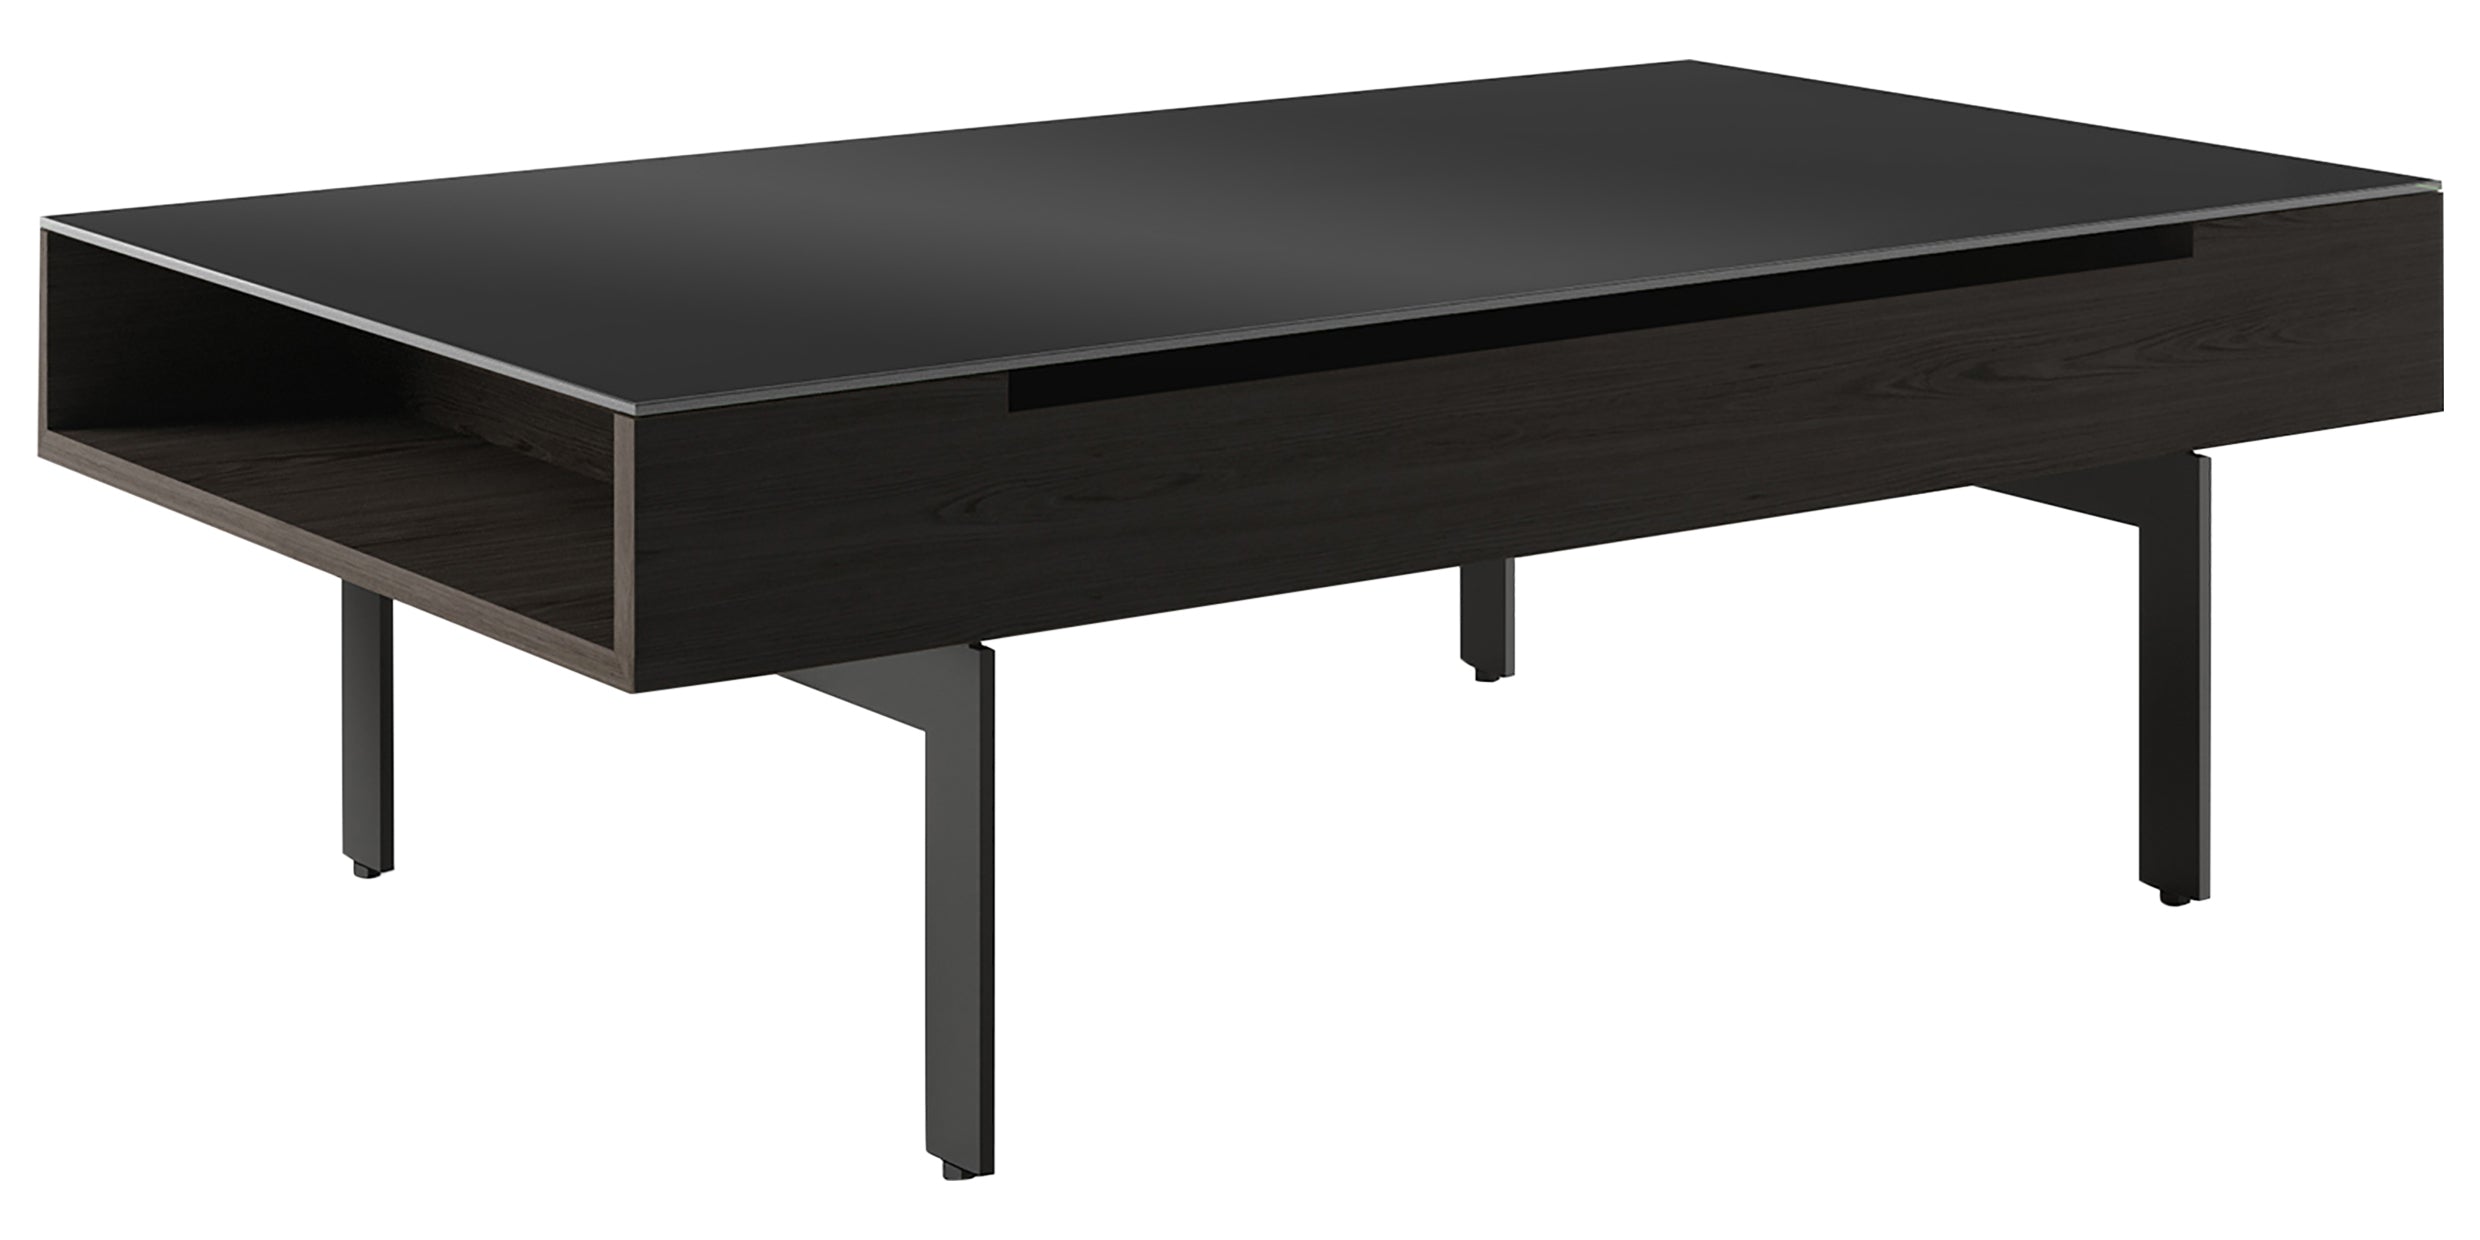 Charcoal Ash Veneer &amp; Black Satin-Etched Glass with Black Steel | BDI Reveal Lift Coffee Table | Valley Ridge Furniture